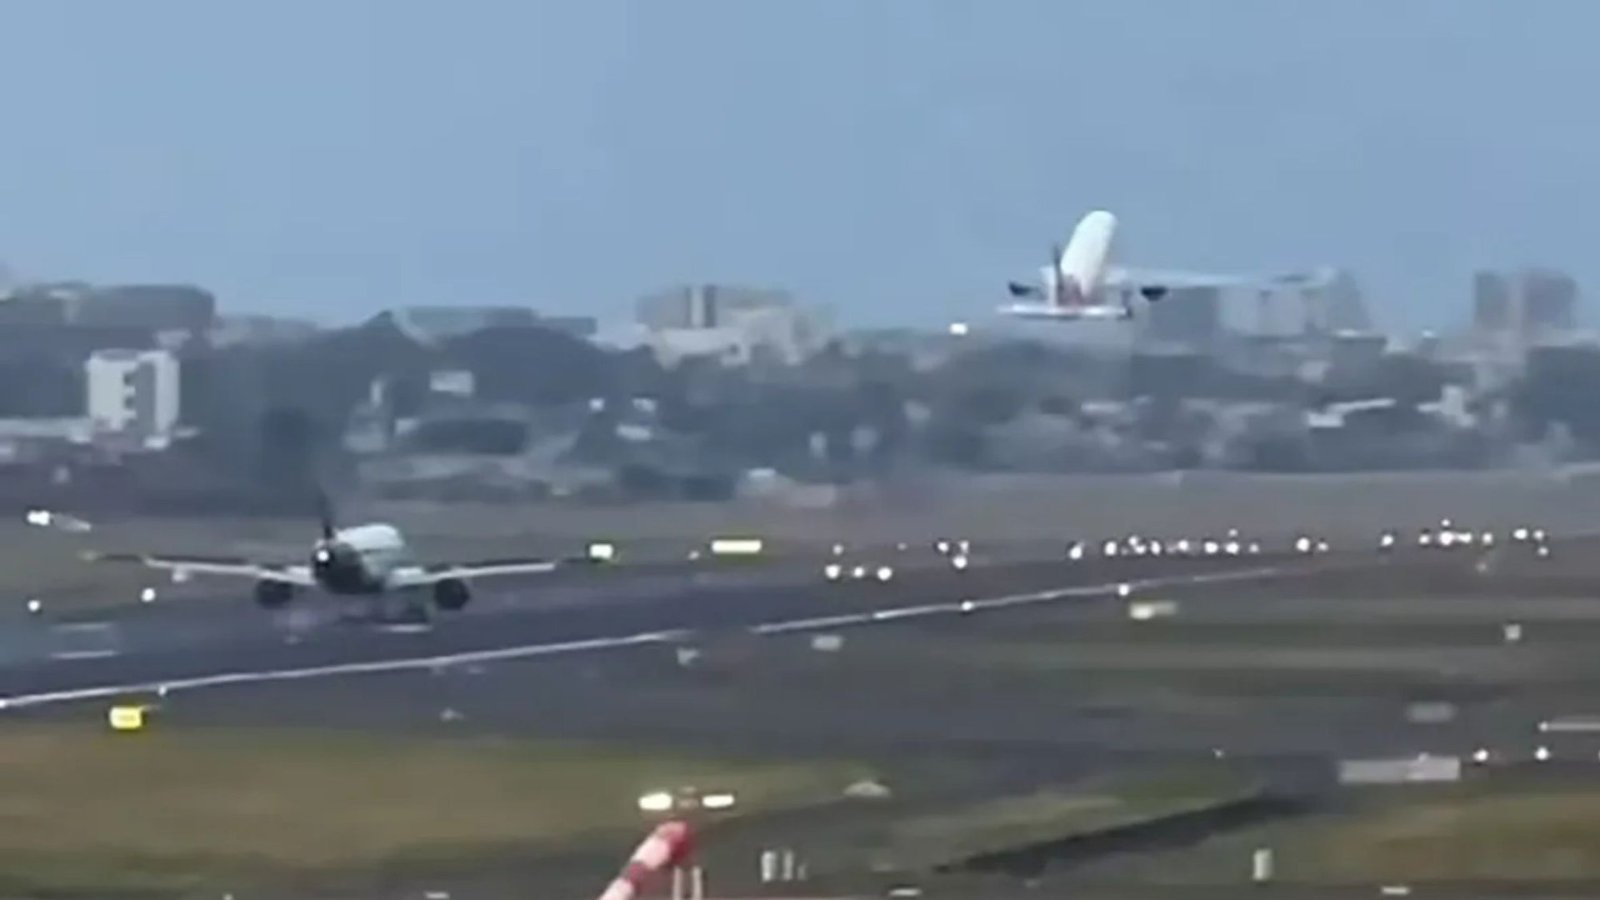 Terrifying moment passenger plane lands just metres behind another at Mumbai airport in heart stopping near miss